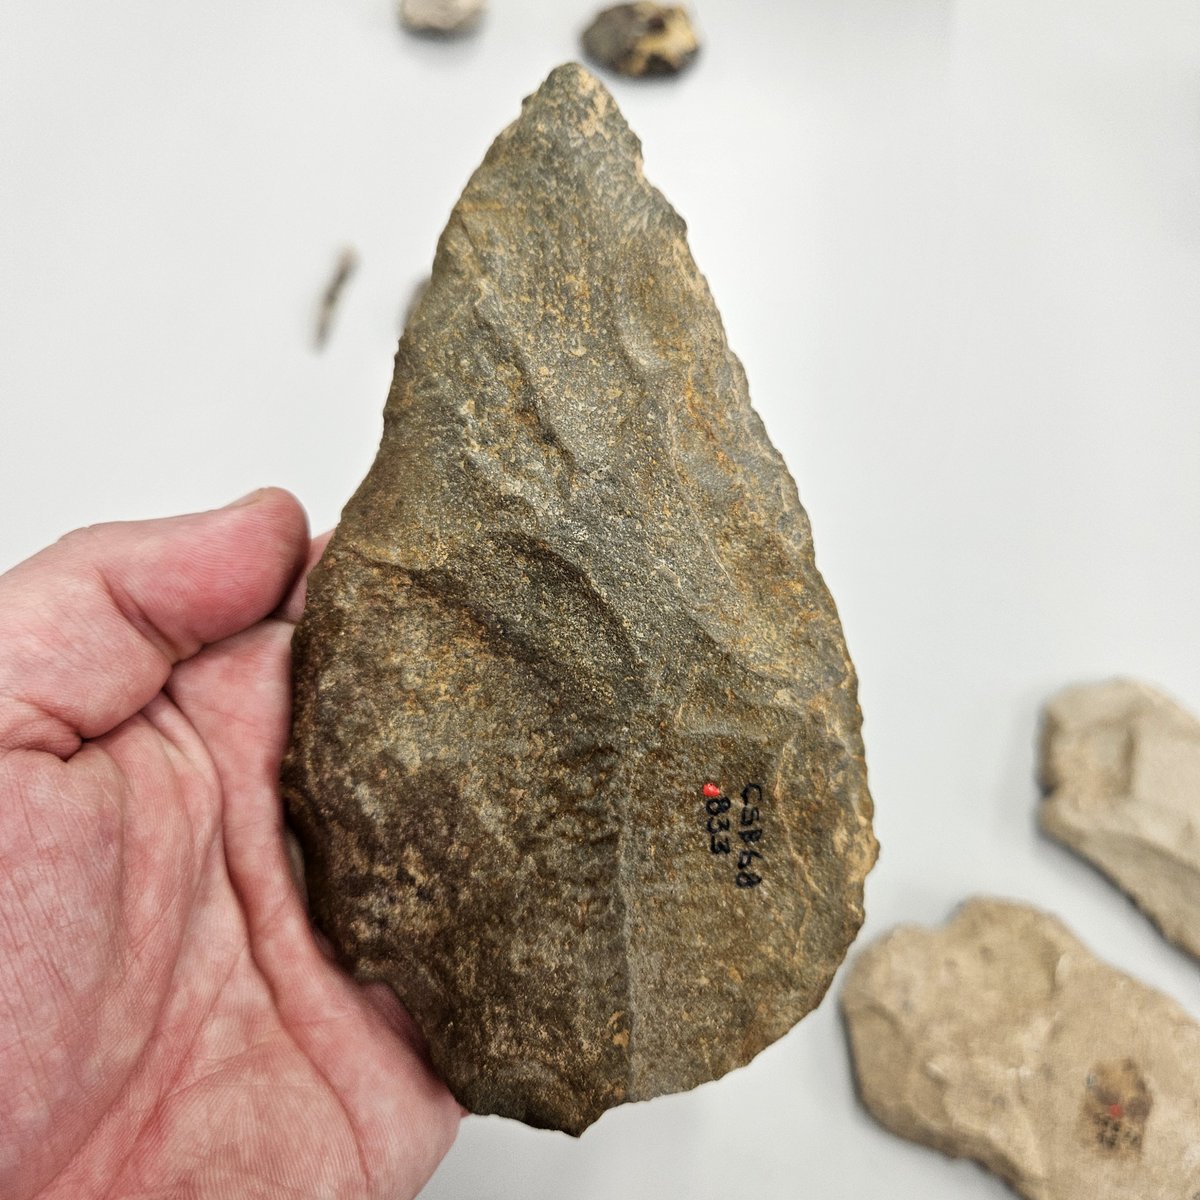 Not a handaxe but a large cutting tool nonetheless. Some symmetry despite much resharpening. Made in Amorican sandstone & maybe carried from Brittany to La Cotte de St Brelade, Jersey. A useful tool, far from home, discarded by a Neanderthal person at the cave site #FindsFriday